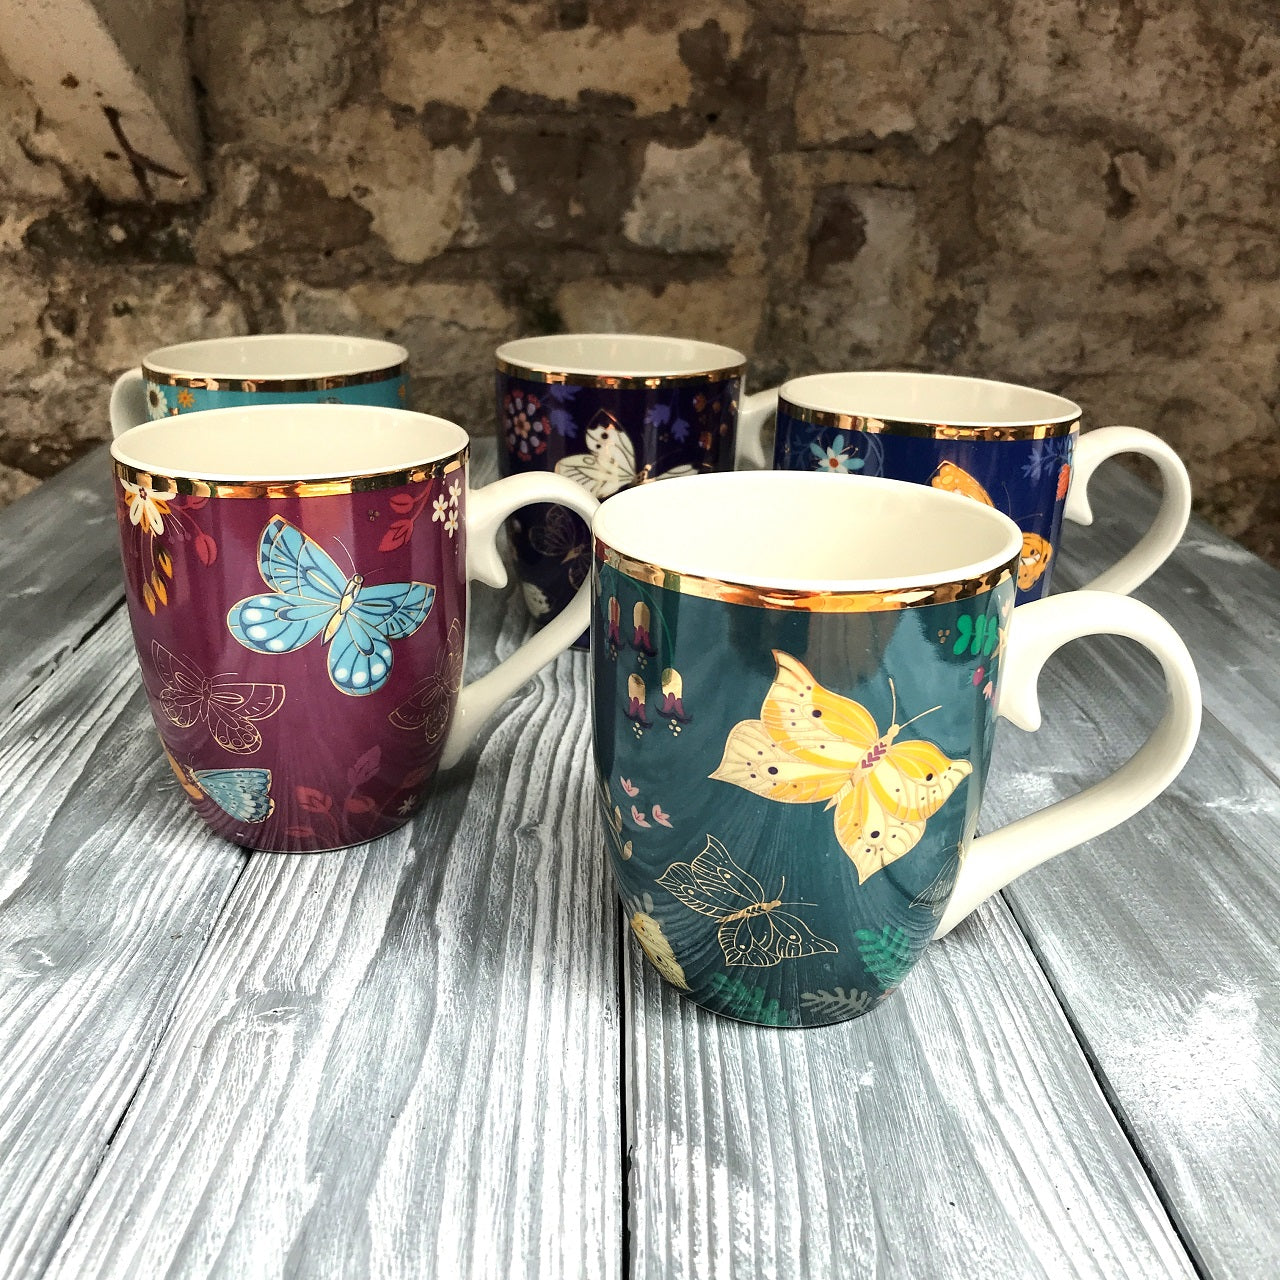 Tipperary Crystal Butterfly Set of 6 Mug Hatbox  Drawing inspiration from urban garden, the Tipperary Crystal Butterfly collection transforms an icon into something modern and unexpected. Playful and elegant, this collection draws from the inherent beauty of the butterfly.